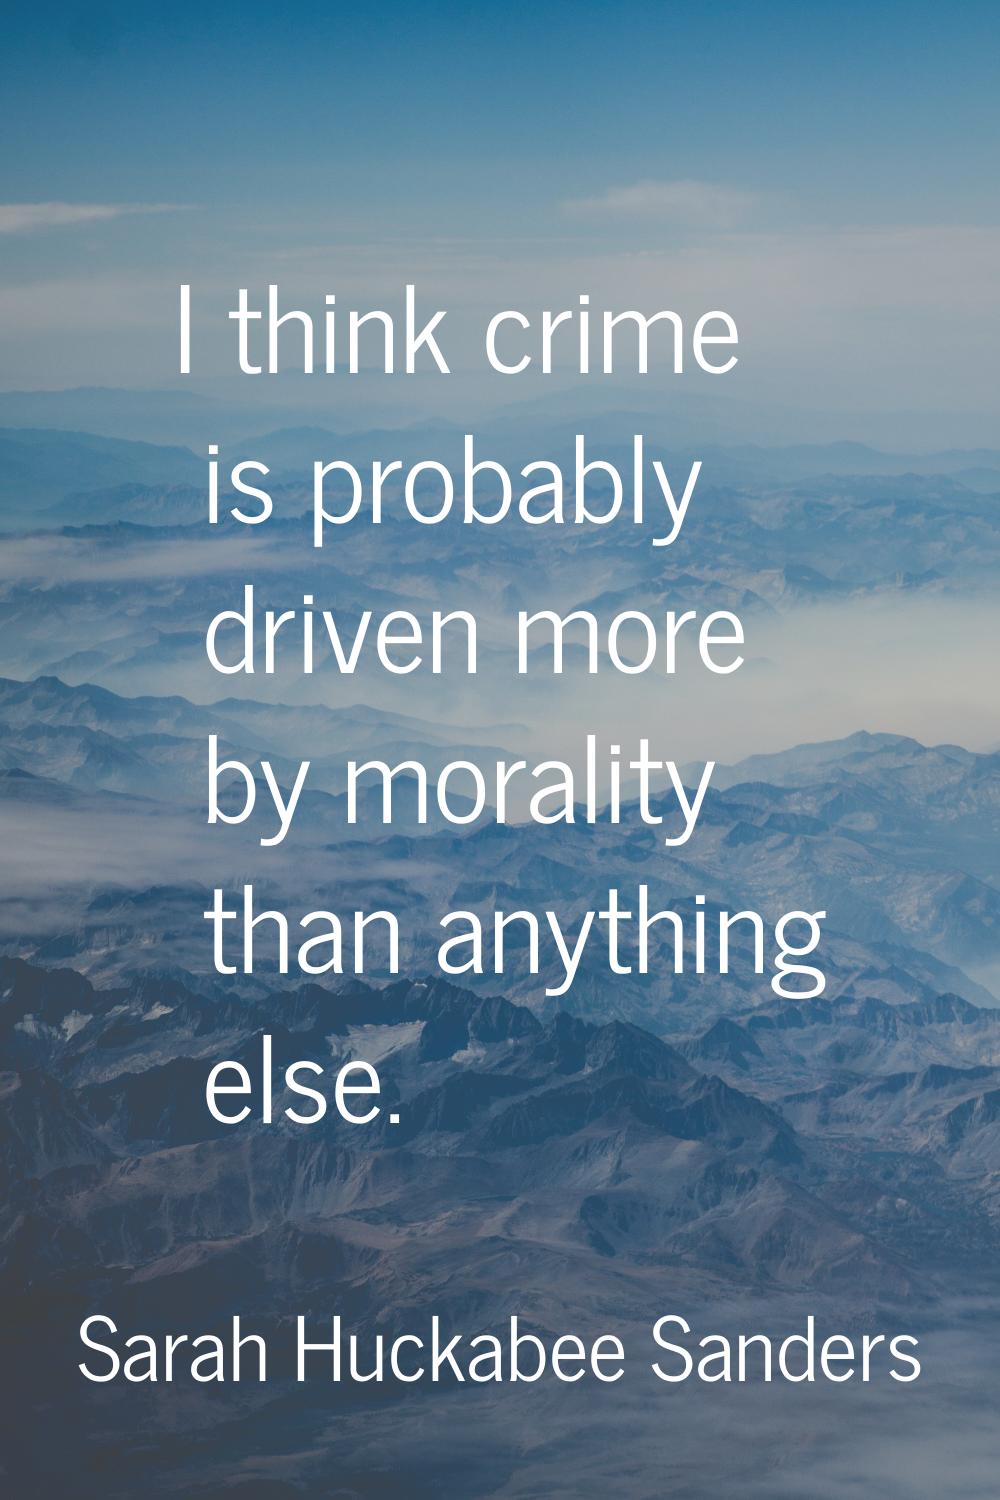 I think crime is probably driven more by morality than anything else.